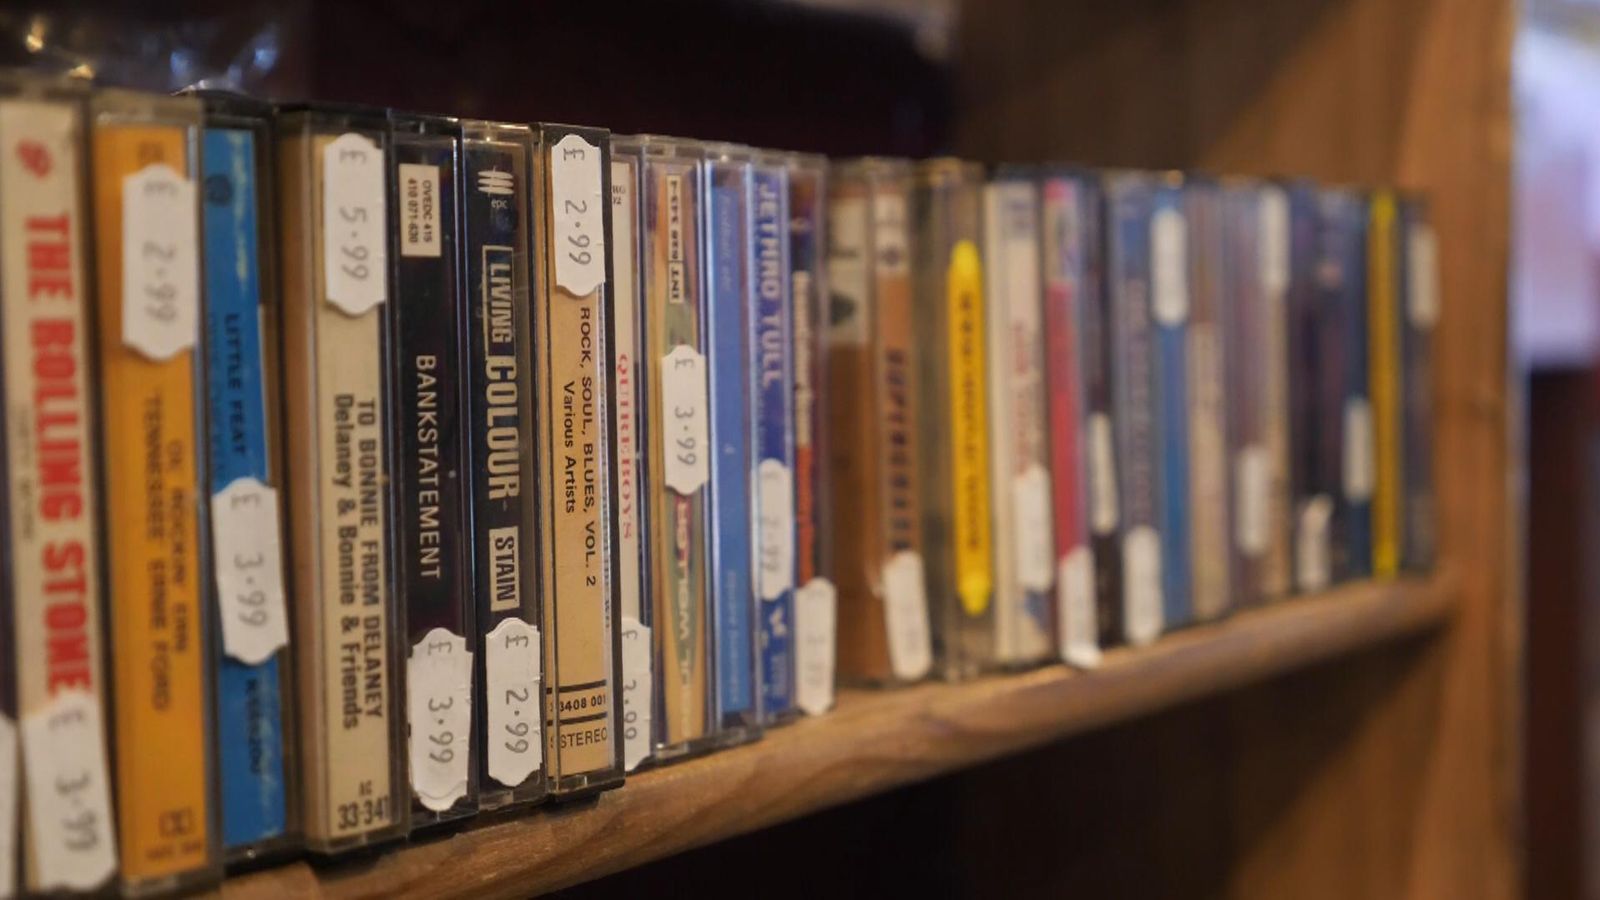 Cassette tape sales hit highest level since 2003, new analysis shows